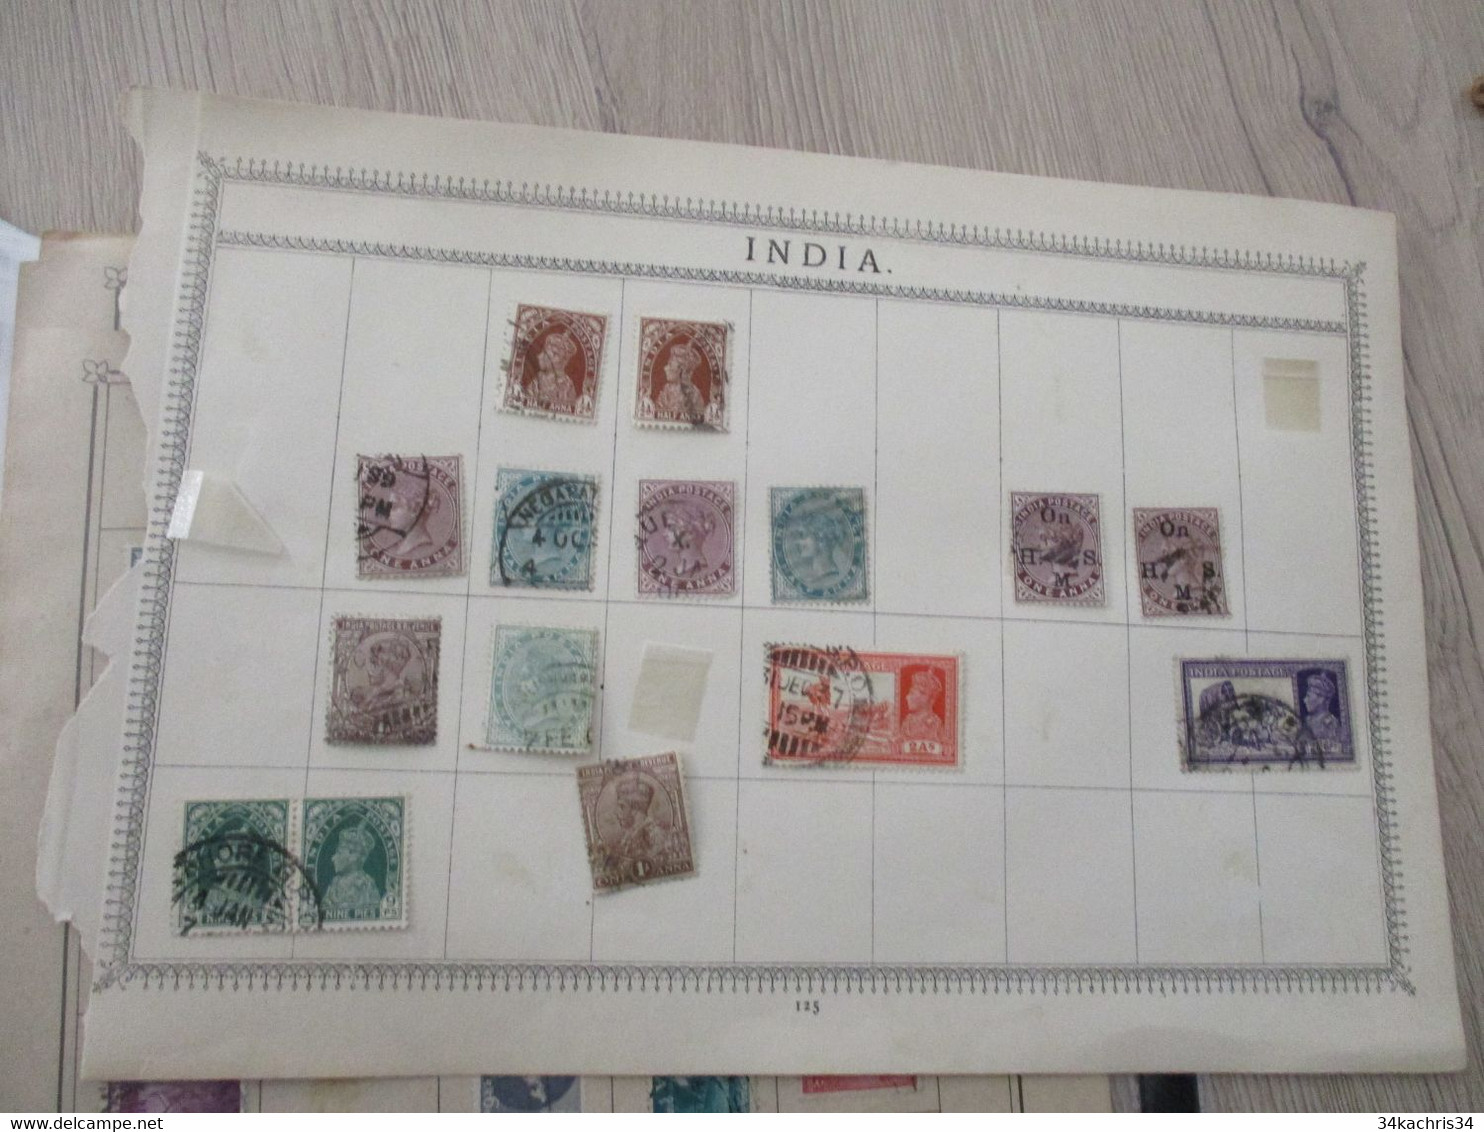 GA INDE INDIA ETATS INDIENS Lot Old Stamp All State Forte Côte Paypal Ok With Conditions Out Of EU - Colecciones & Series